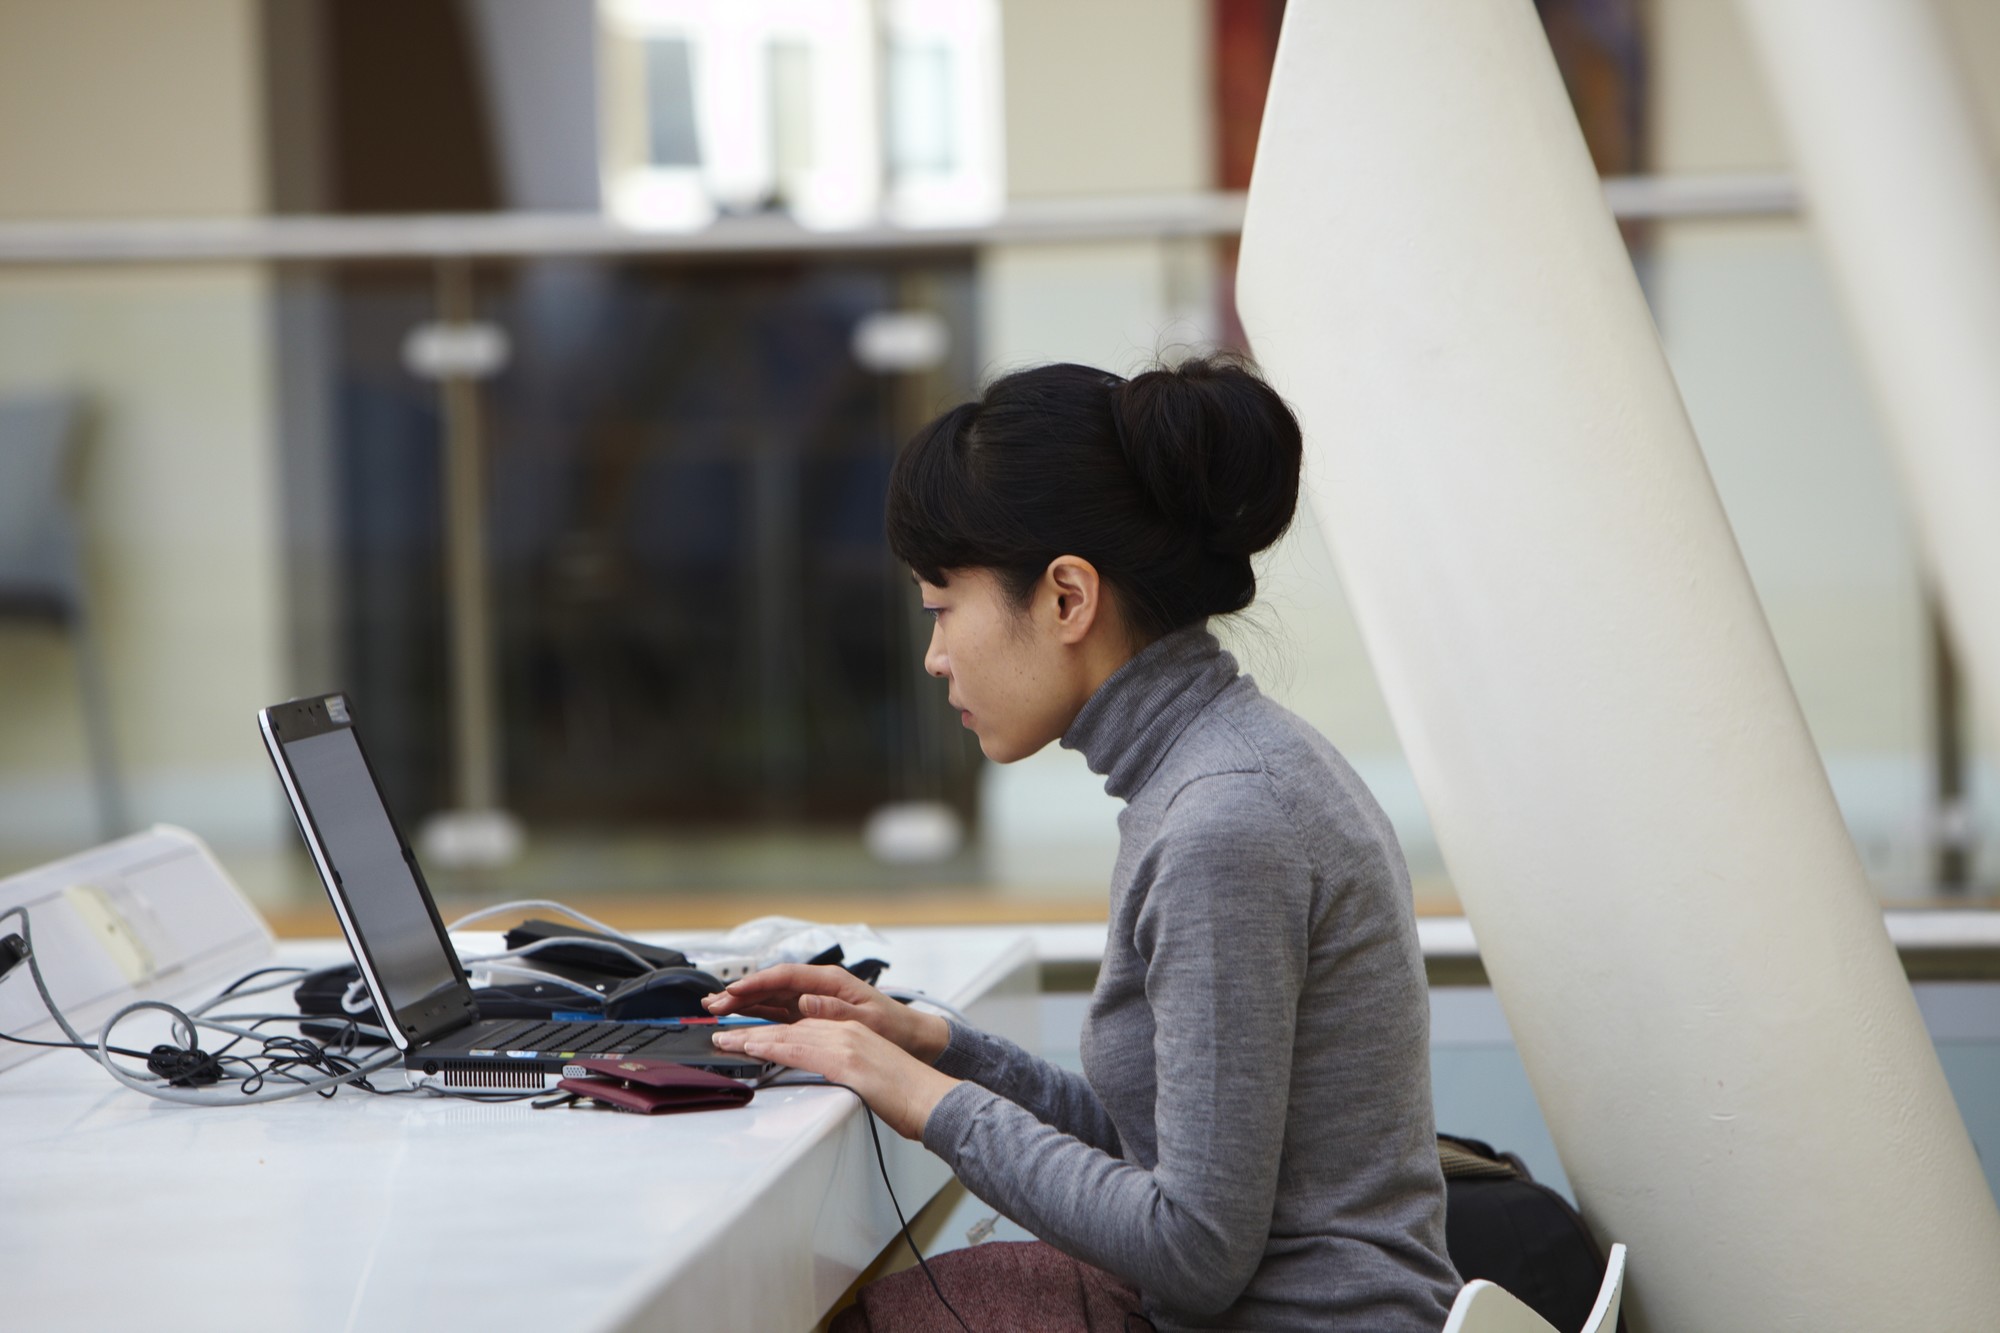 An image of a student using their laptop